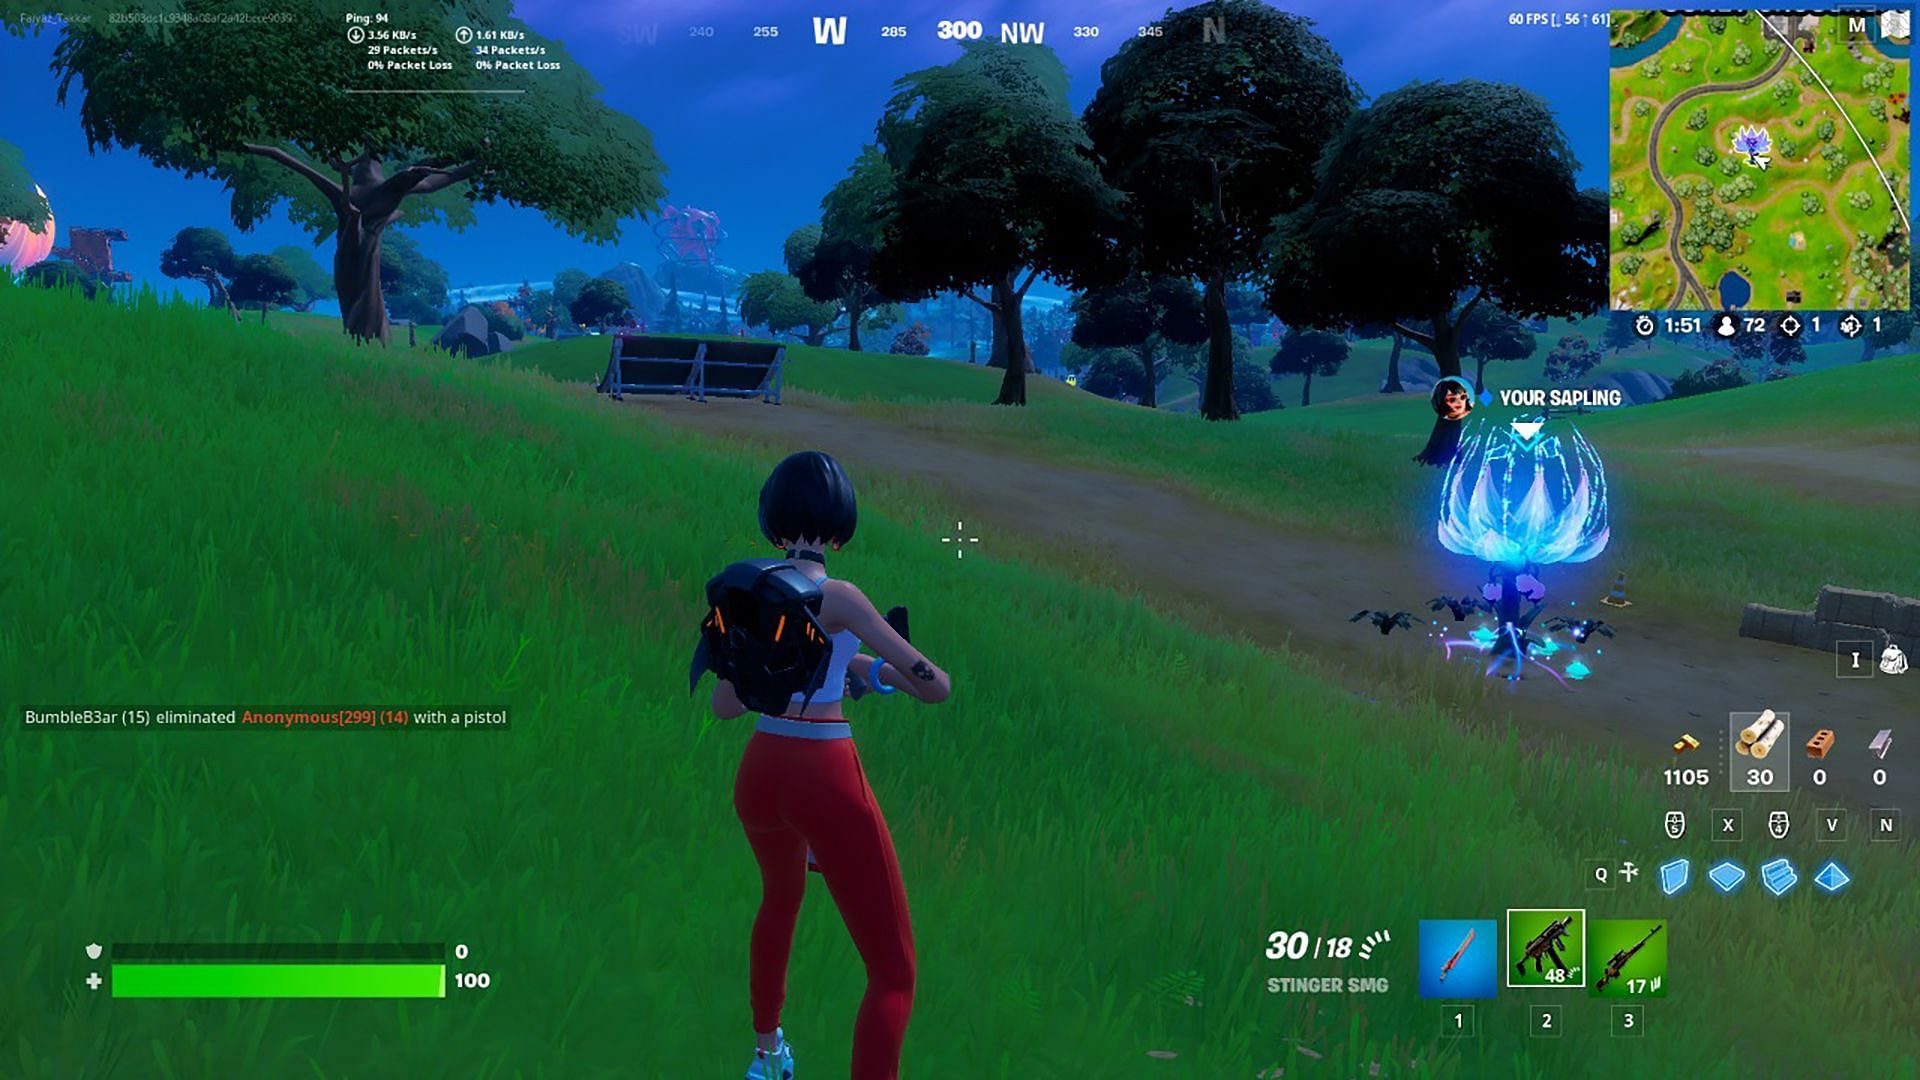 A player hip firing in the game (Image via Epic Games)